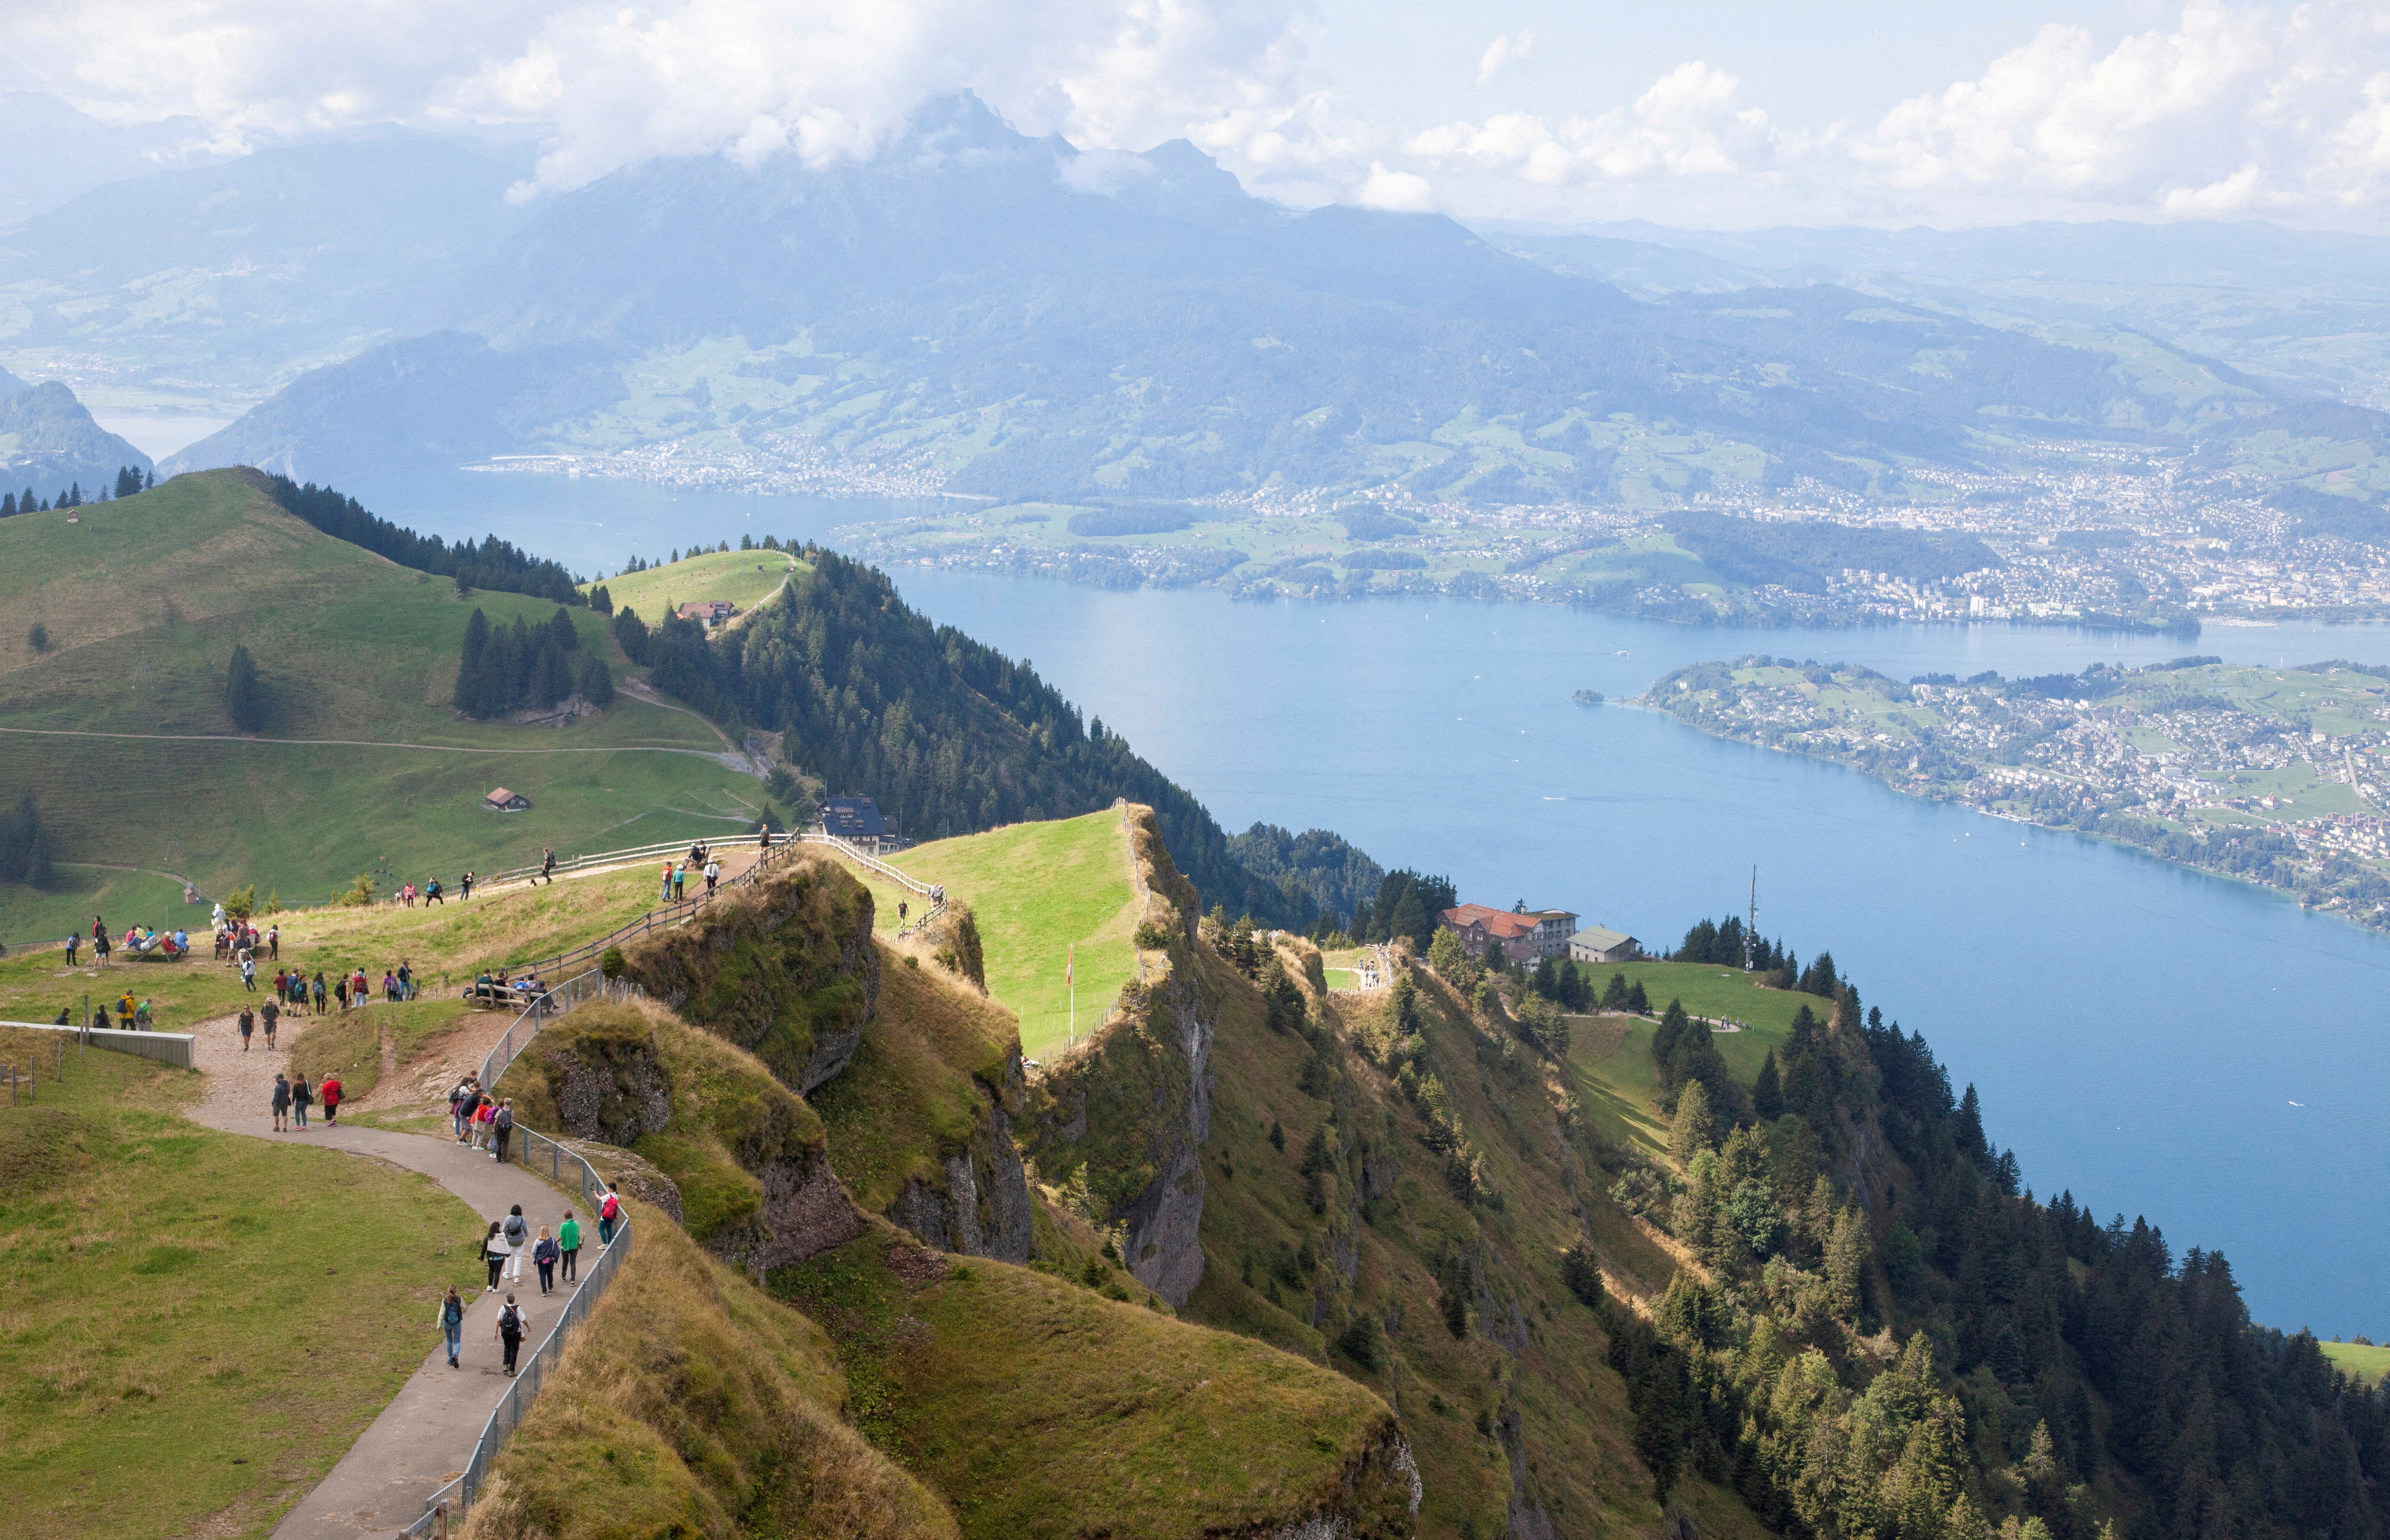 Tourists walk as Lake Lucerne is seen in the background, near the peak of Mount Rigi